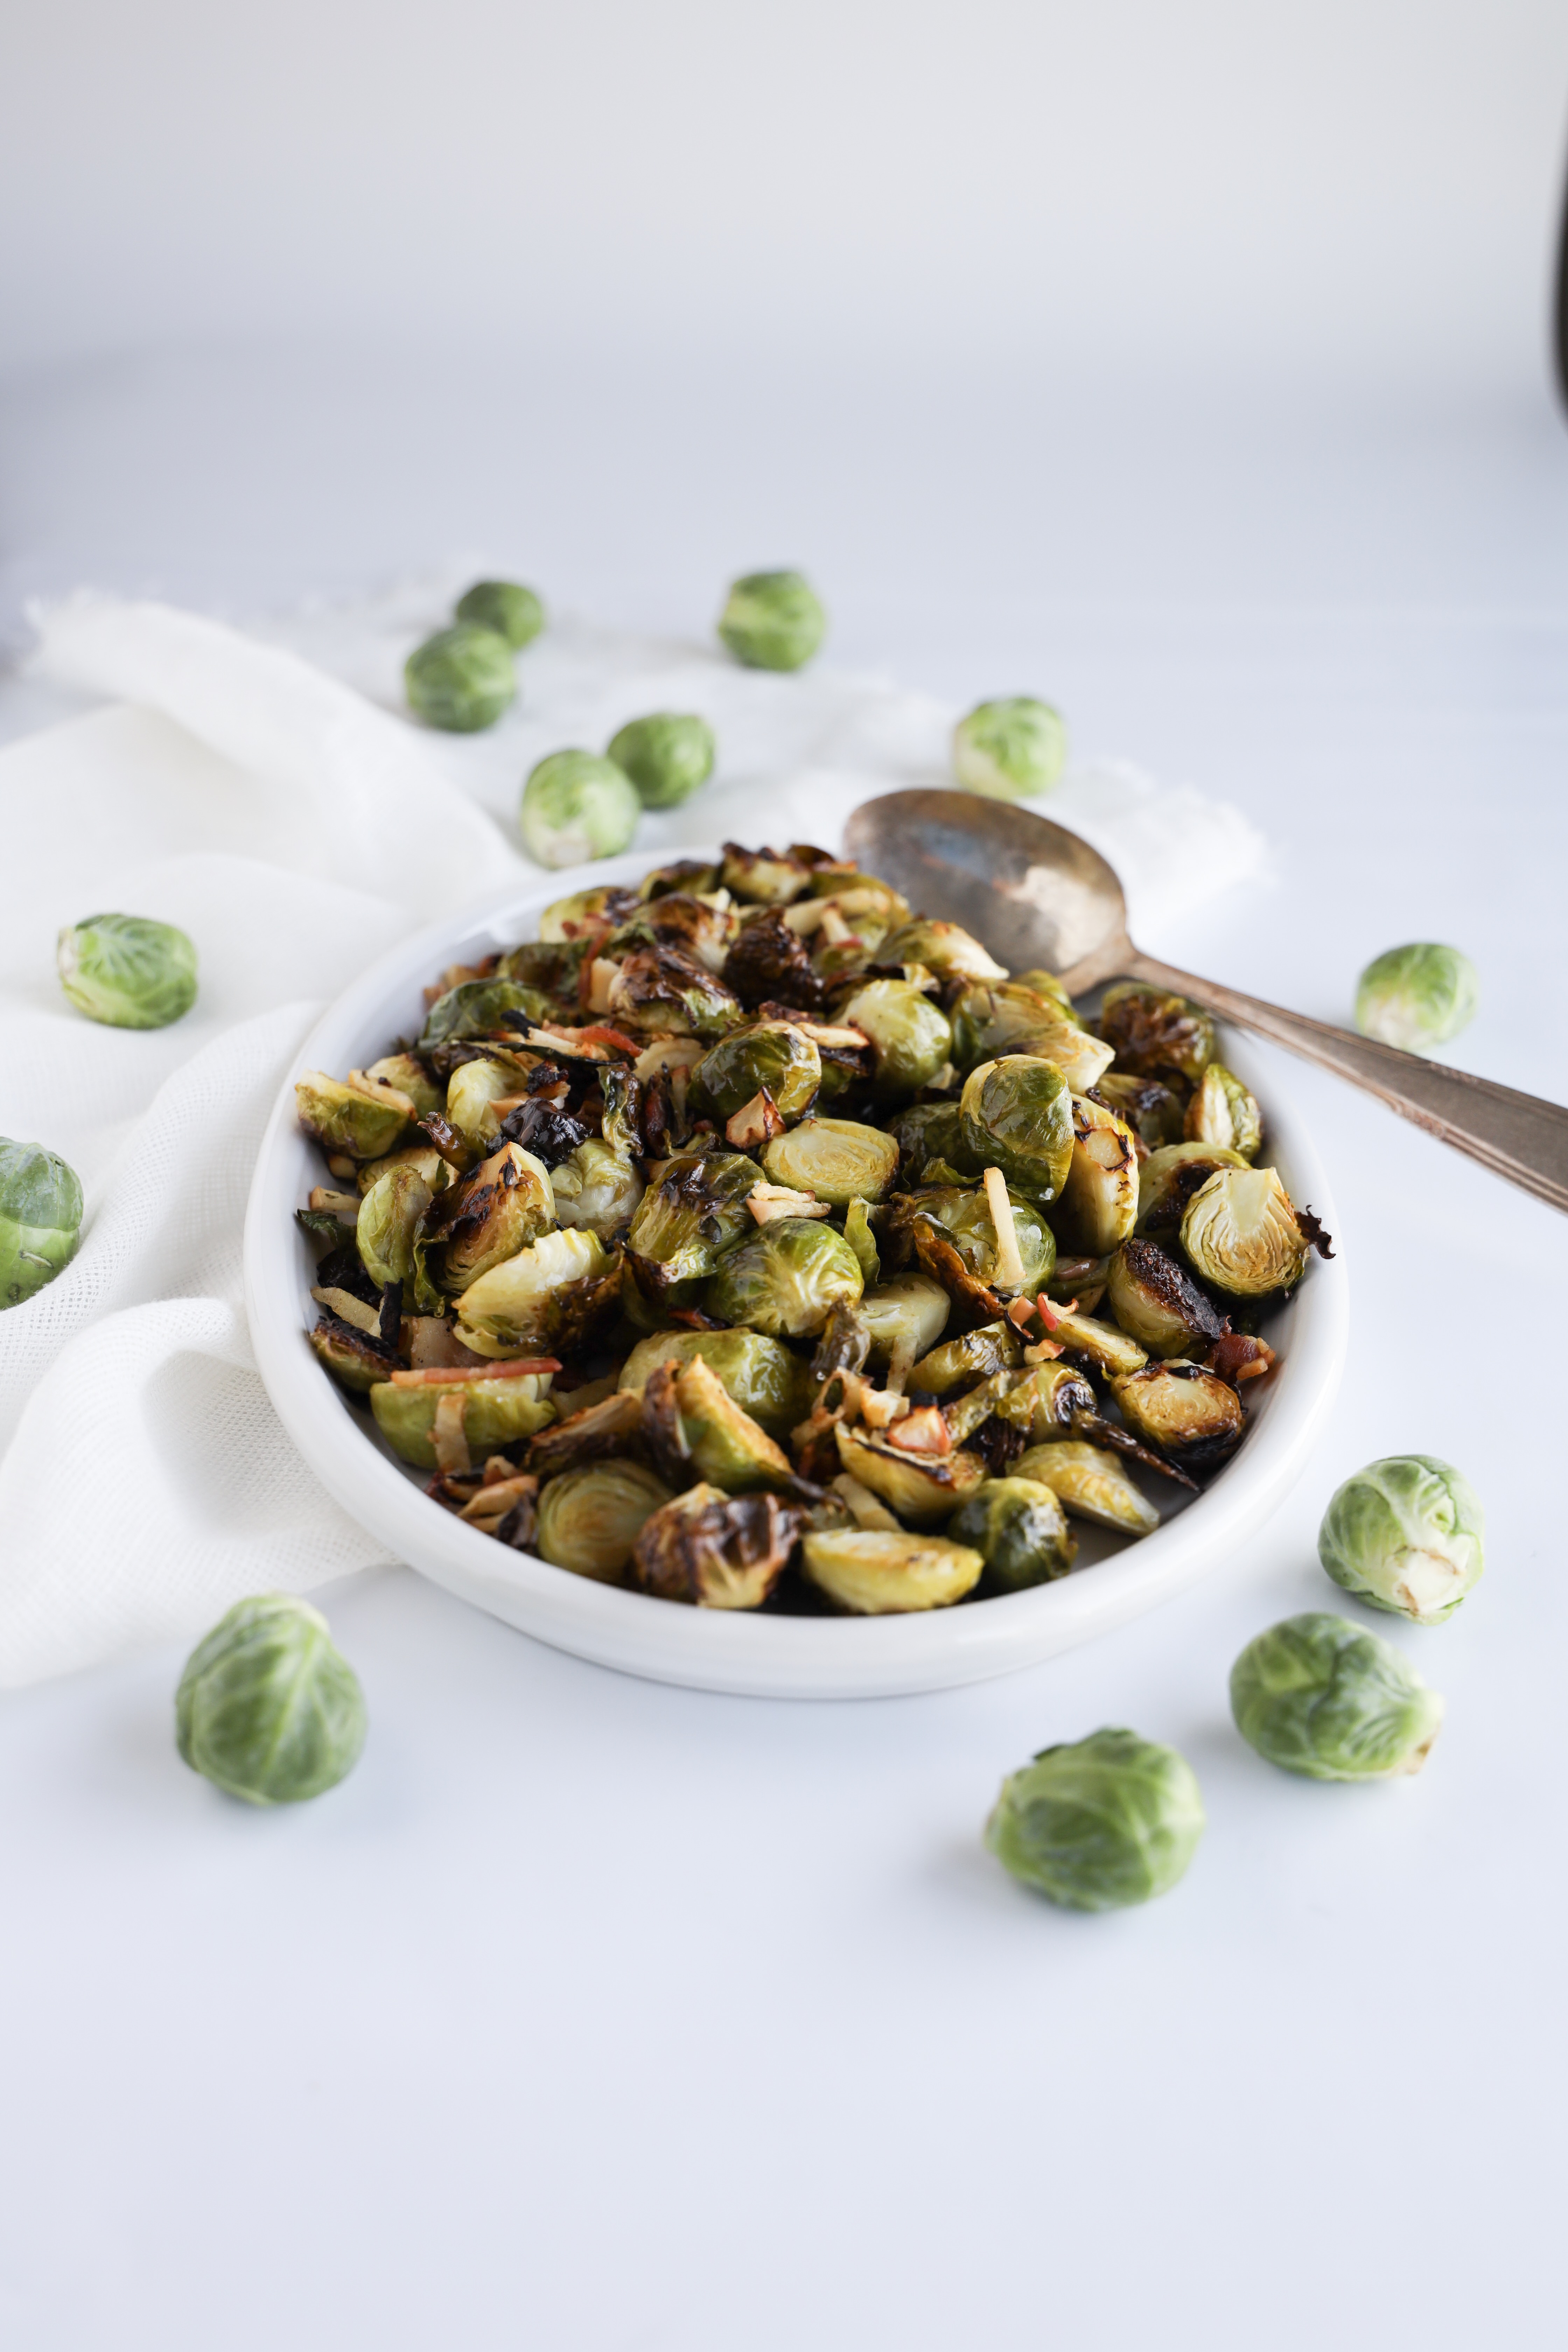 Roasted Brussels sprouts Recipe